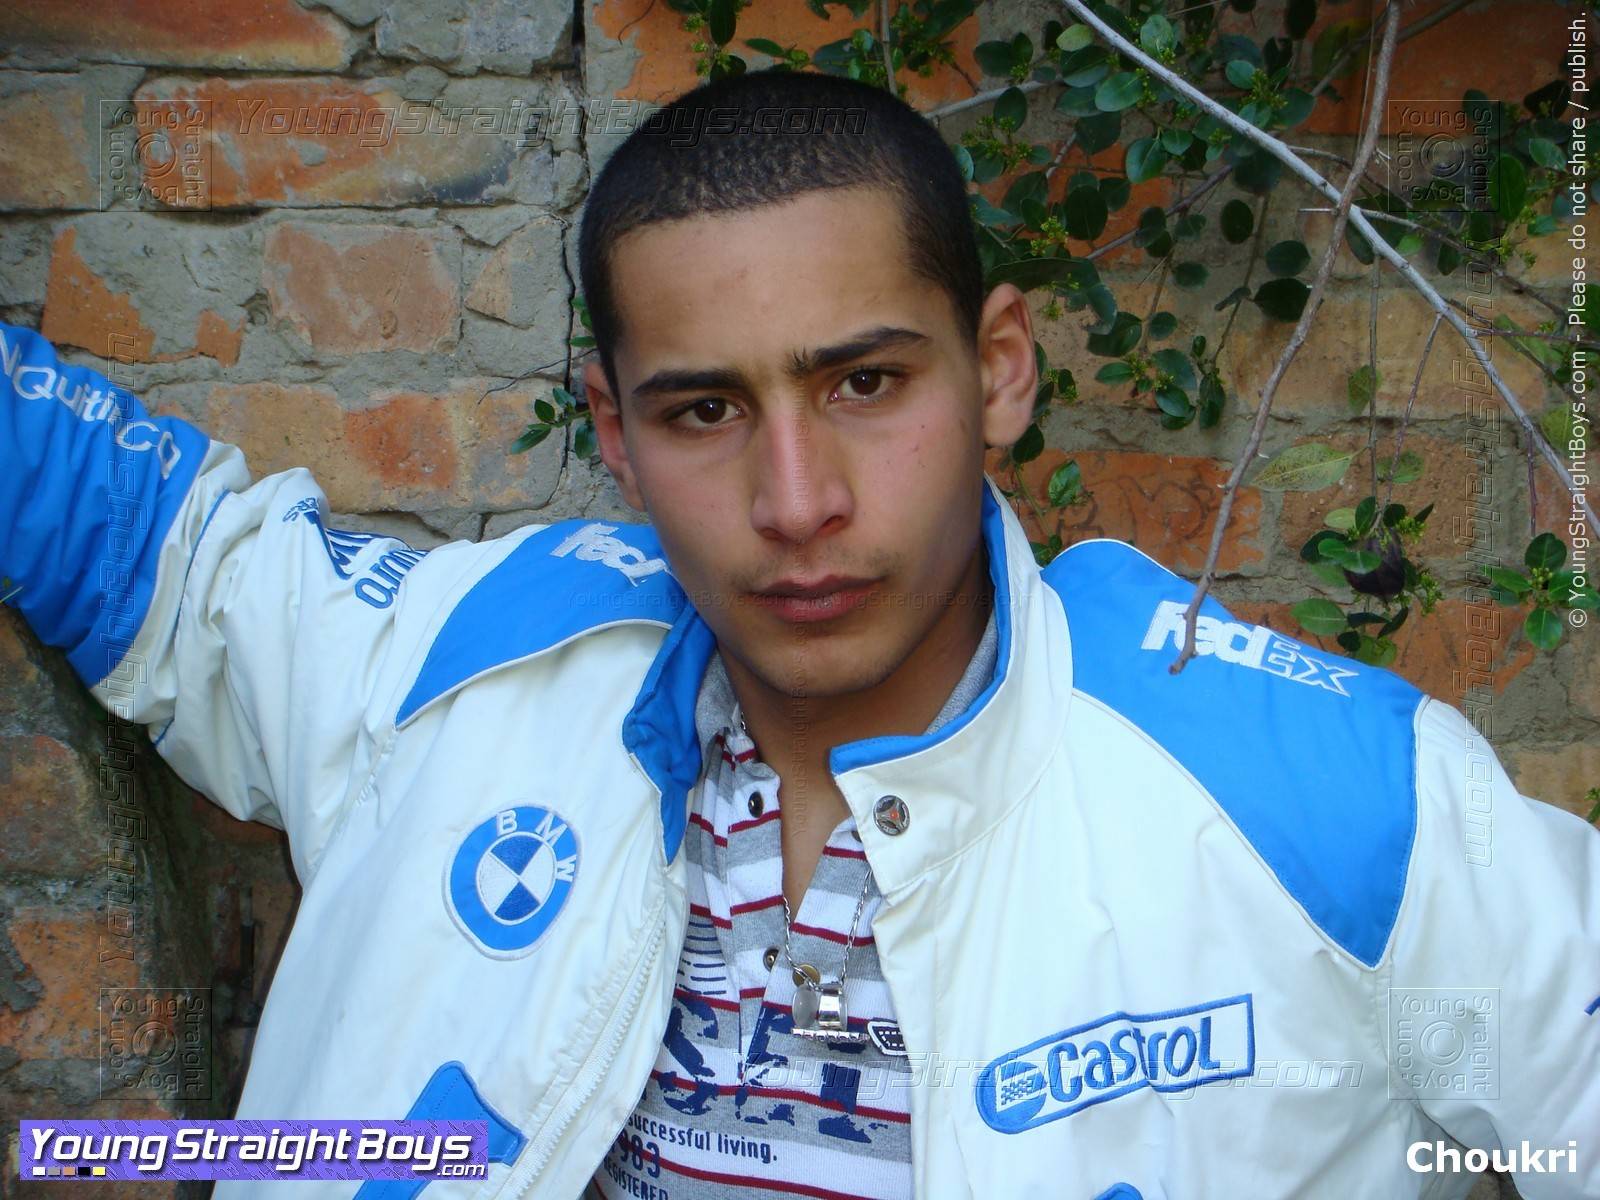 Tady, Choukri (a cute 'rogue' Arab straight boy) is posing in front of an old wall